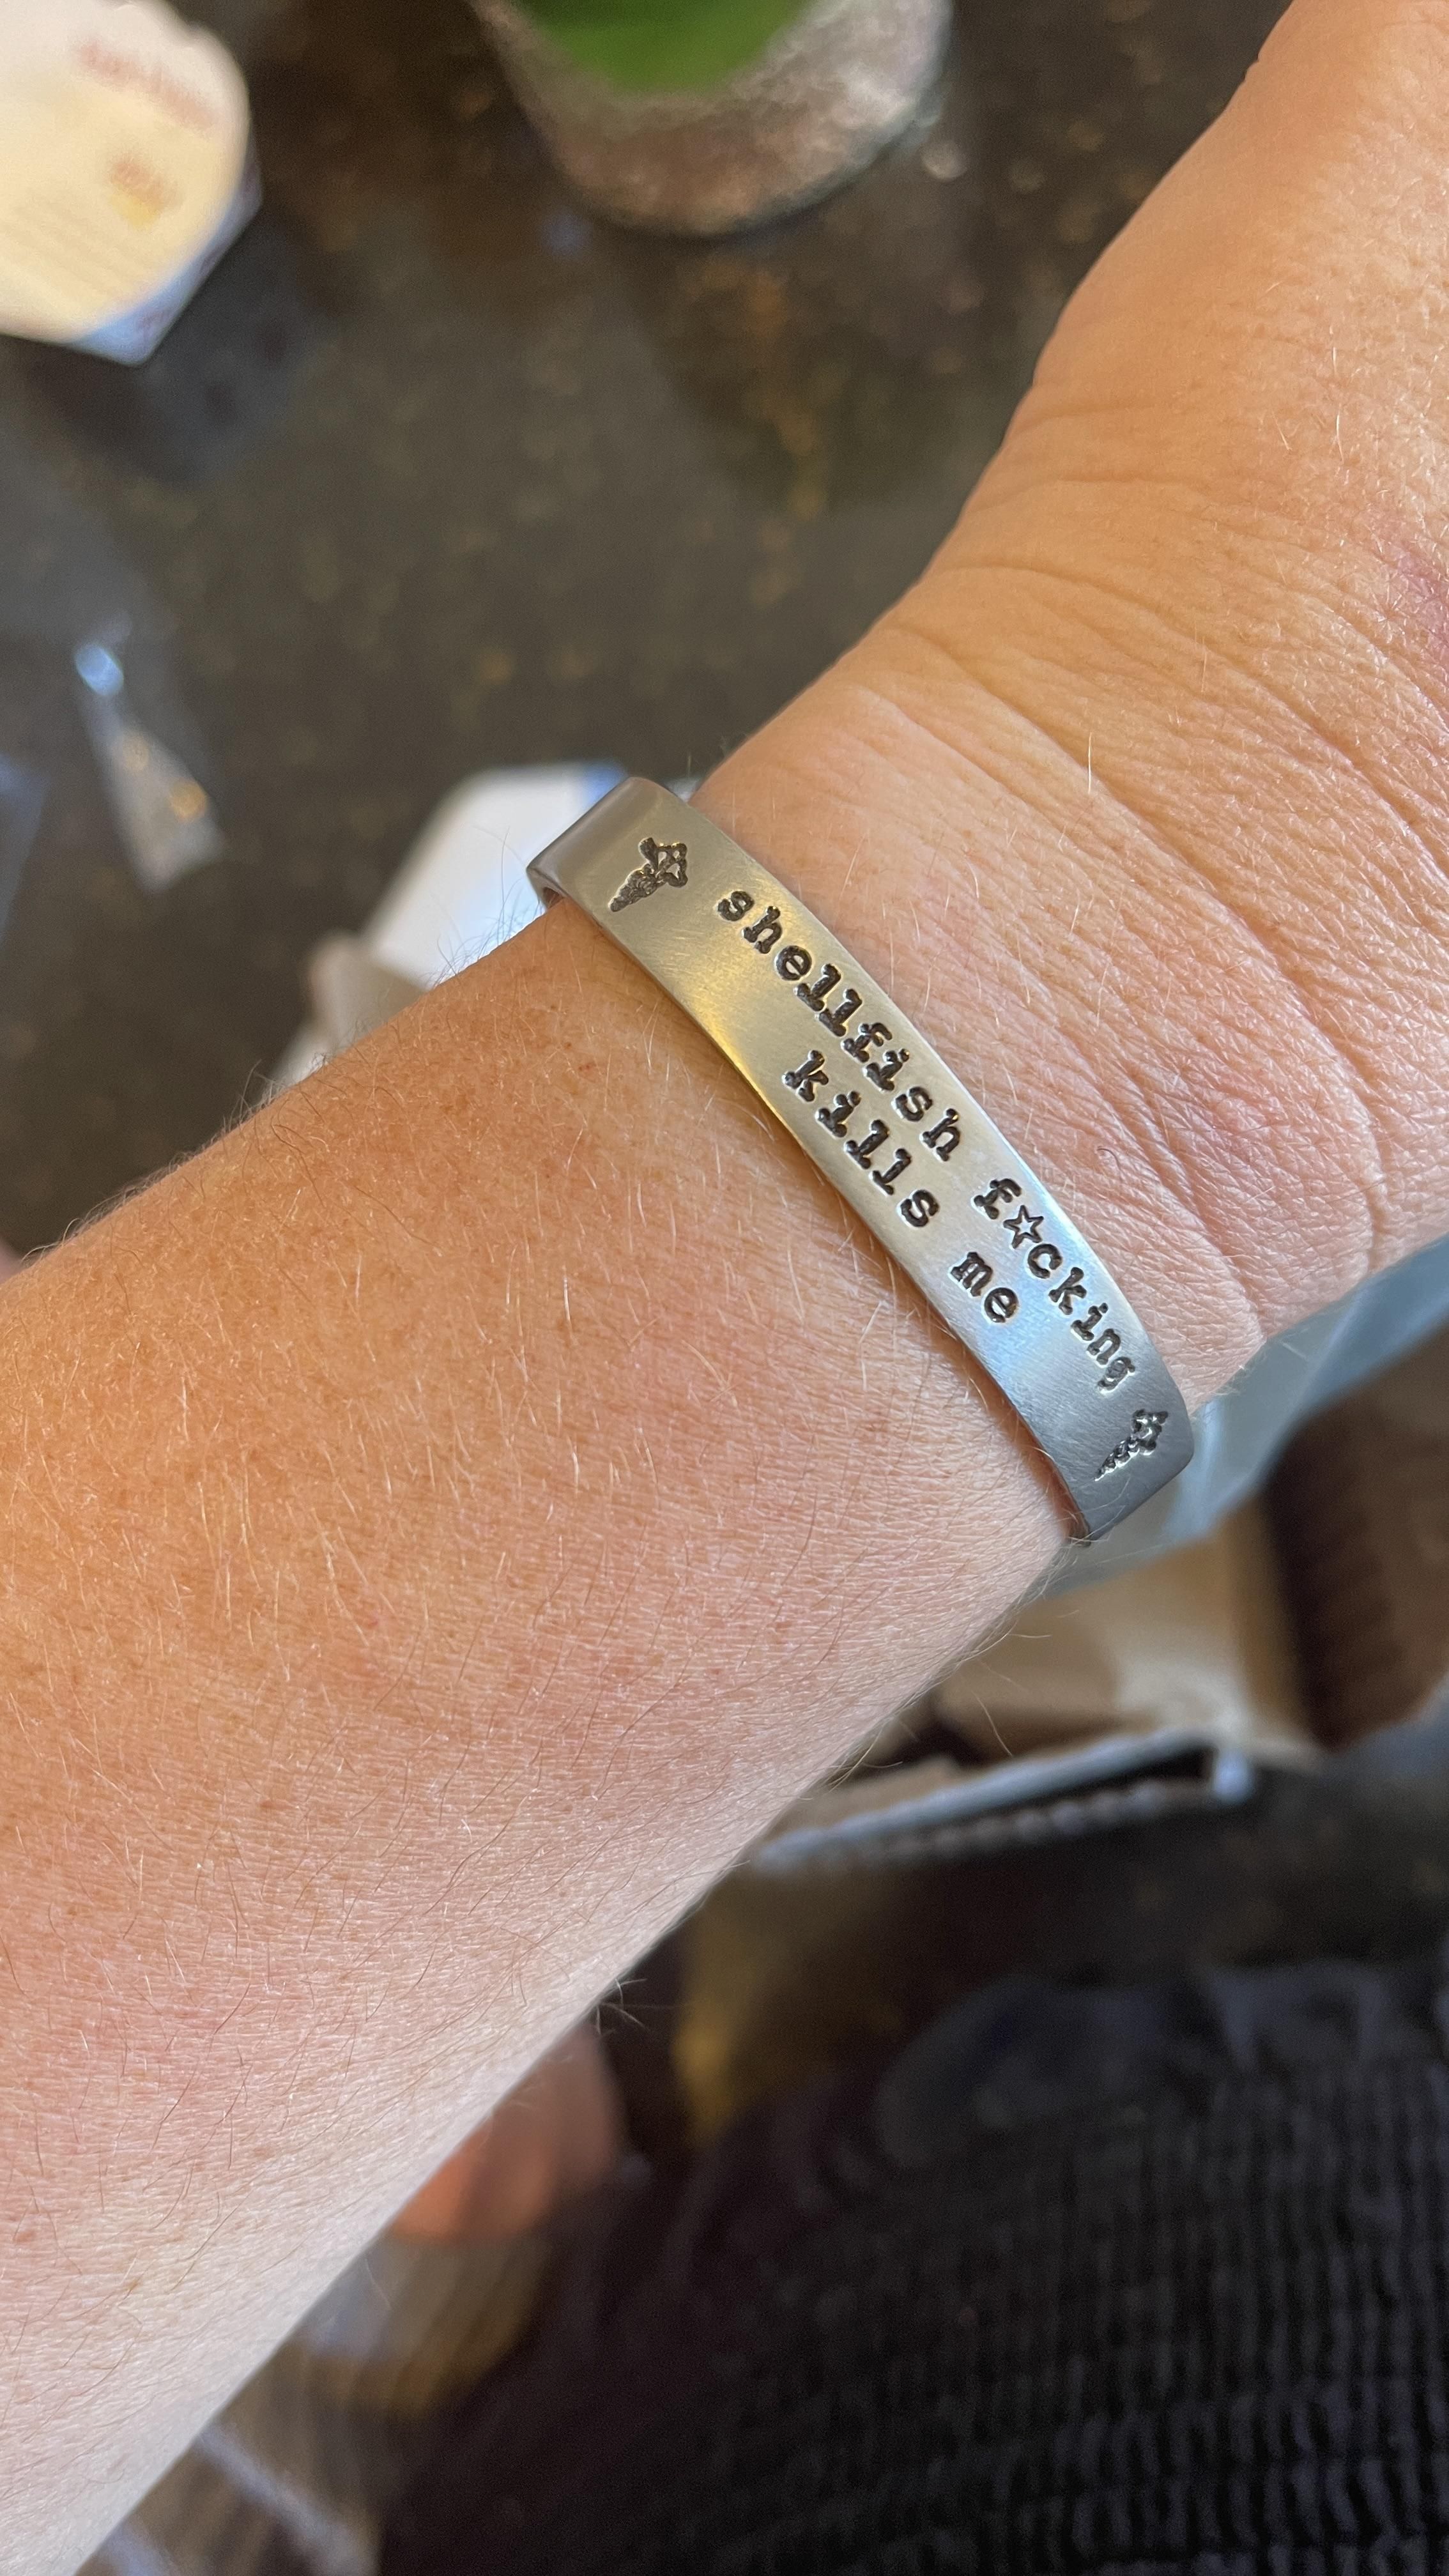 I developed an anaphylactic shellfish allergy last month at age 41. I’m pretty pissed about it, but my medical alert bracelet makes me smile.